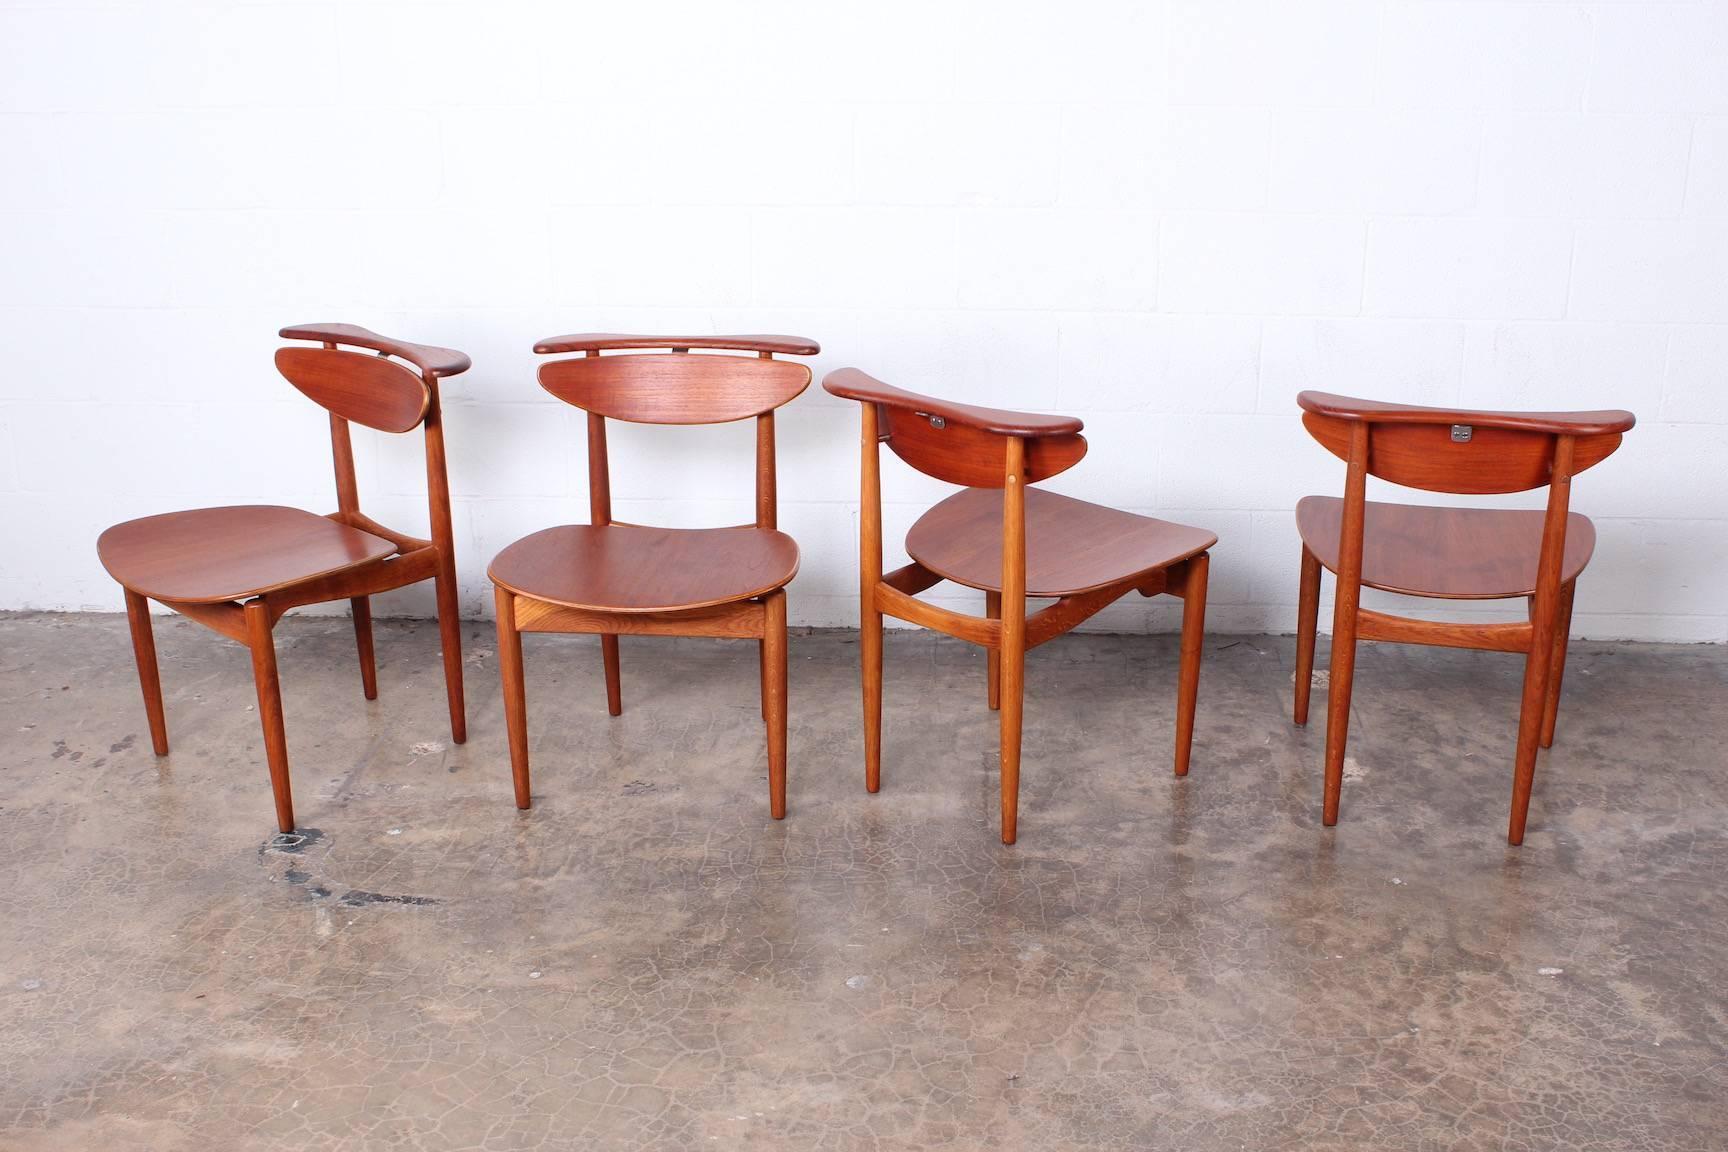 A rare set of four teak and oak dining chairs by Finn Juhl for Bovirke.